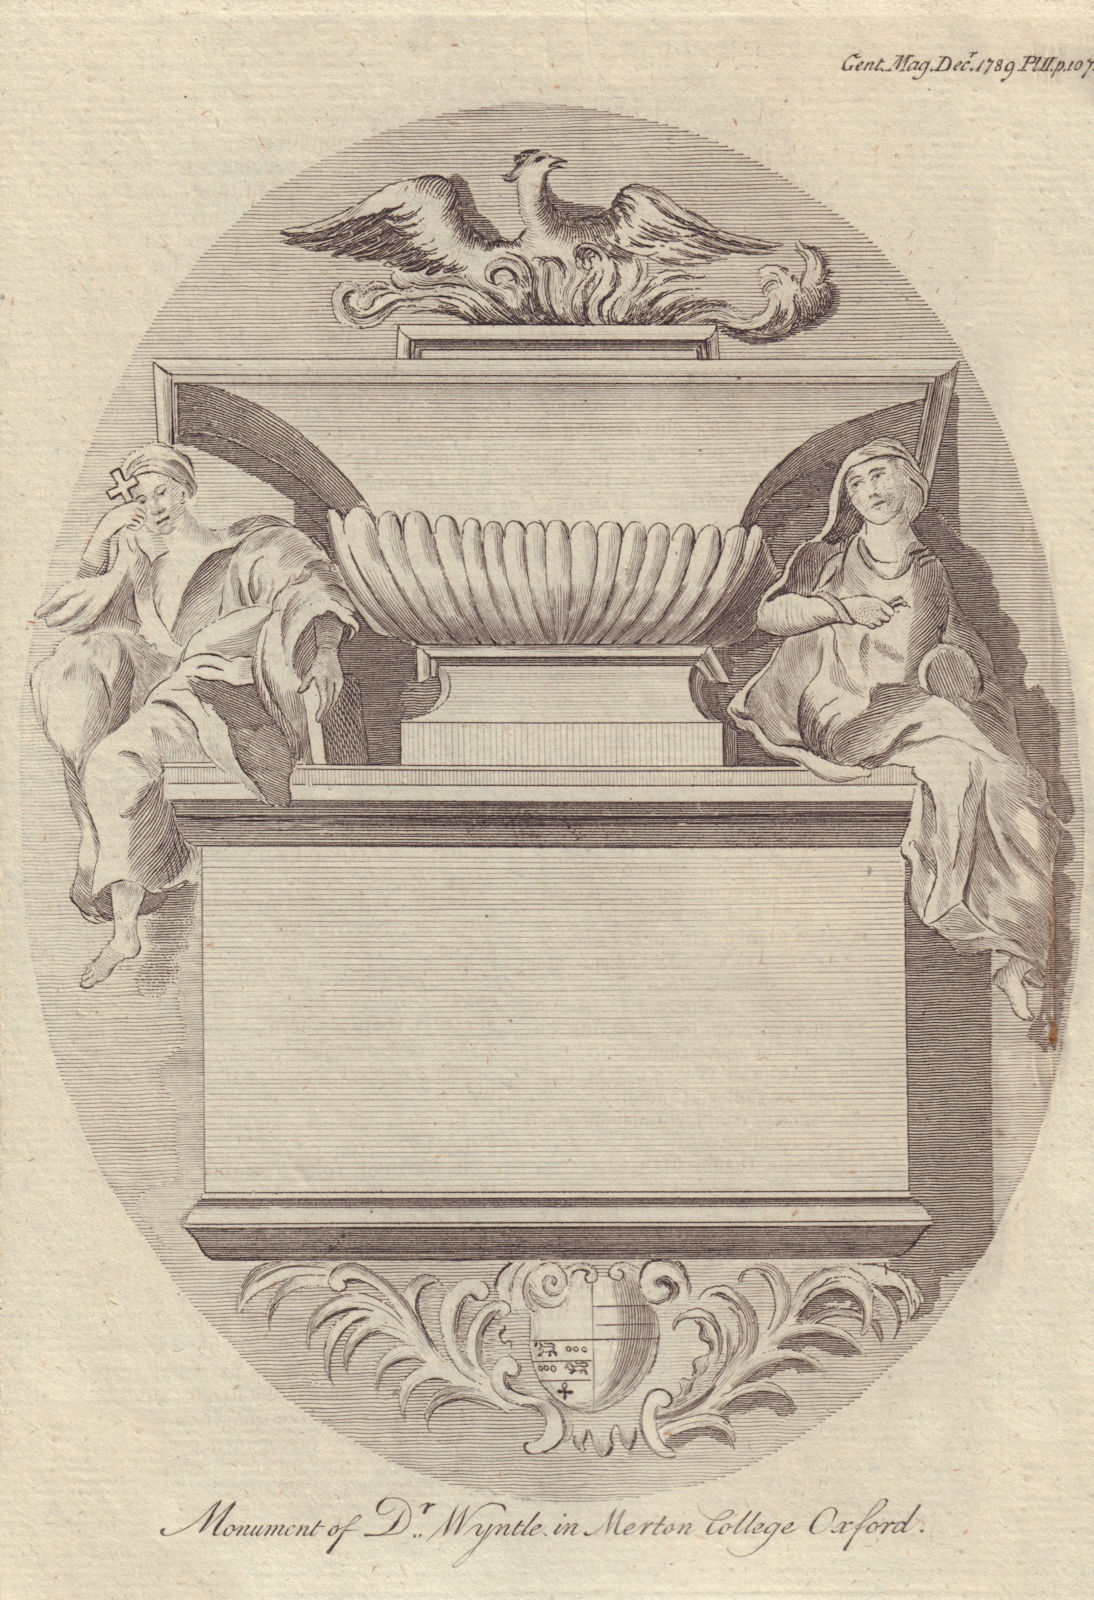 Associate Product Monument of Dr Wyntle in the Chapel of Merton College Oxford 1789 old print